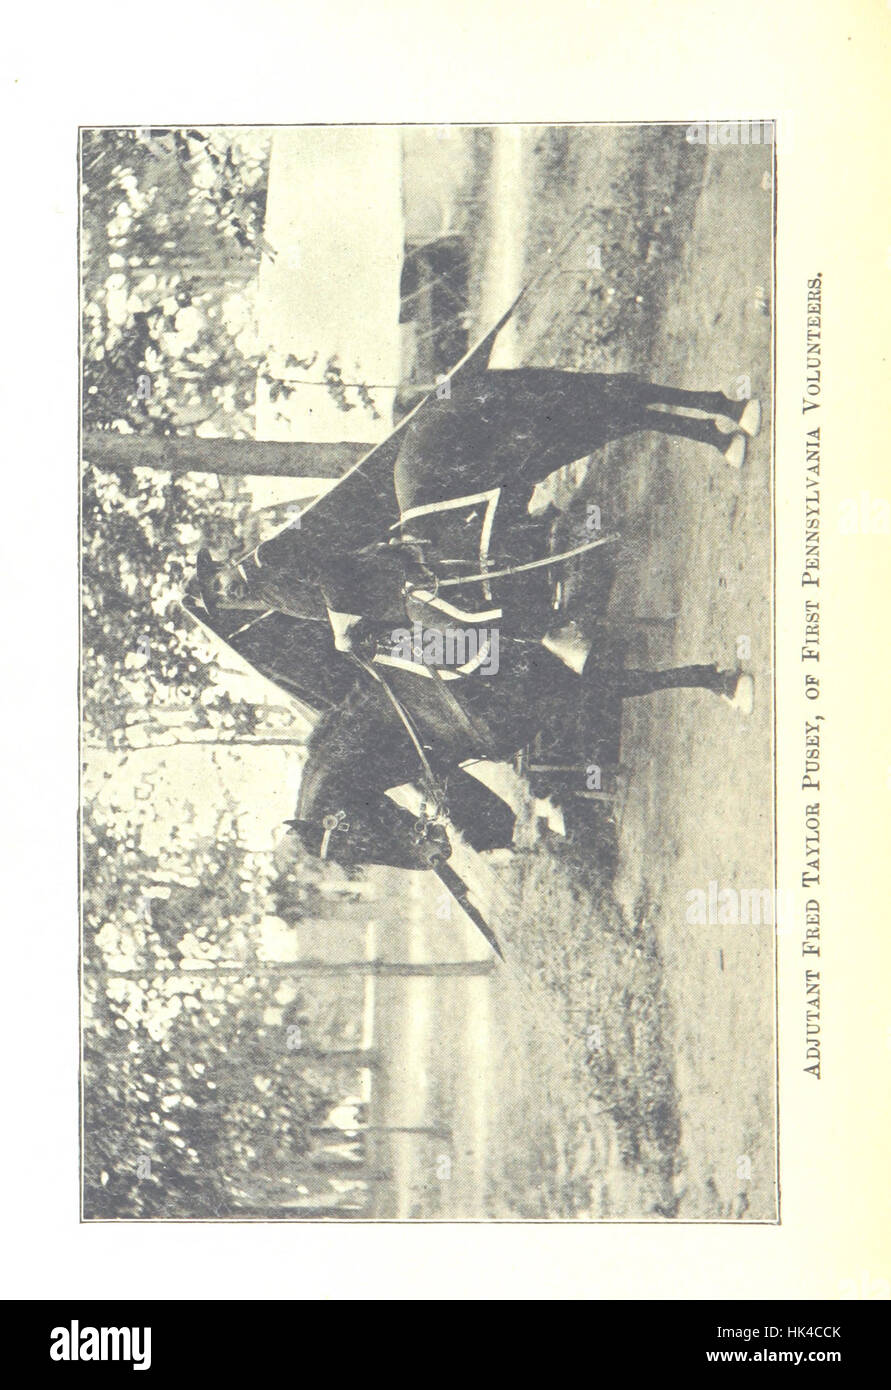 Image taken from page 108 of 'Lights and Shadows of our war with Spain. A series of historical sketches, incidents, anecdotes and personal experiences in the Hispano-American War' Image taken from page 108 of 'Lights an Stock Photo